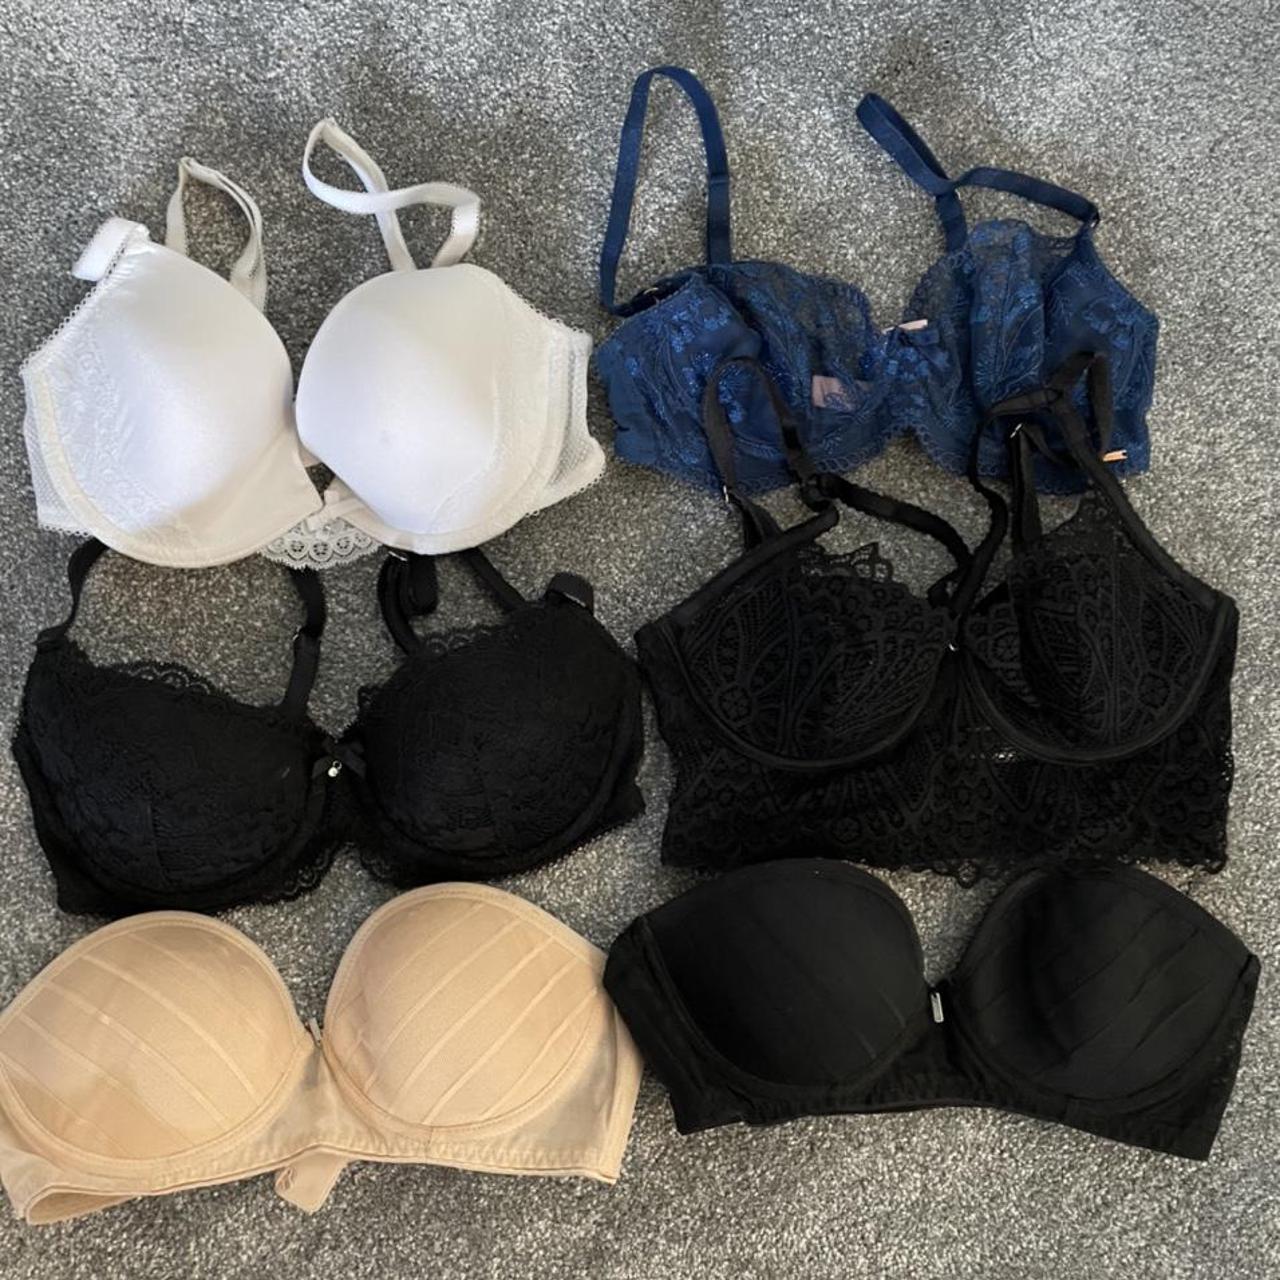 6 immaculate bras (3 new), Size 28c - 30d, Boux